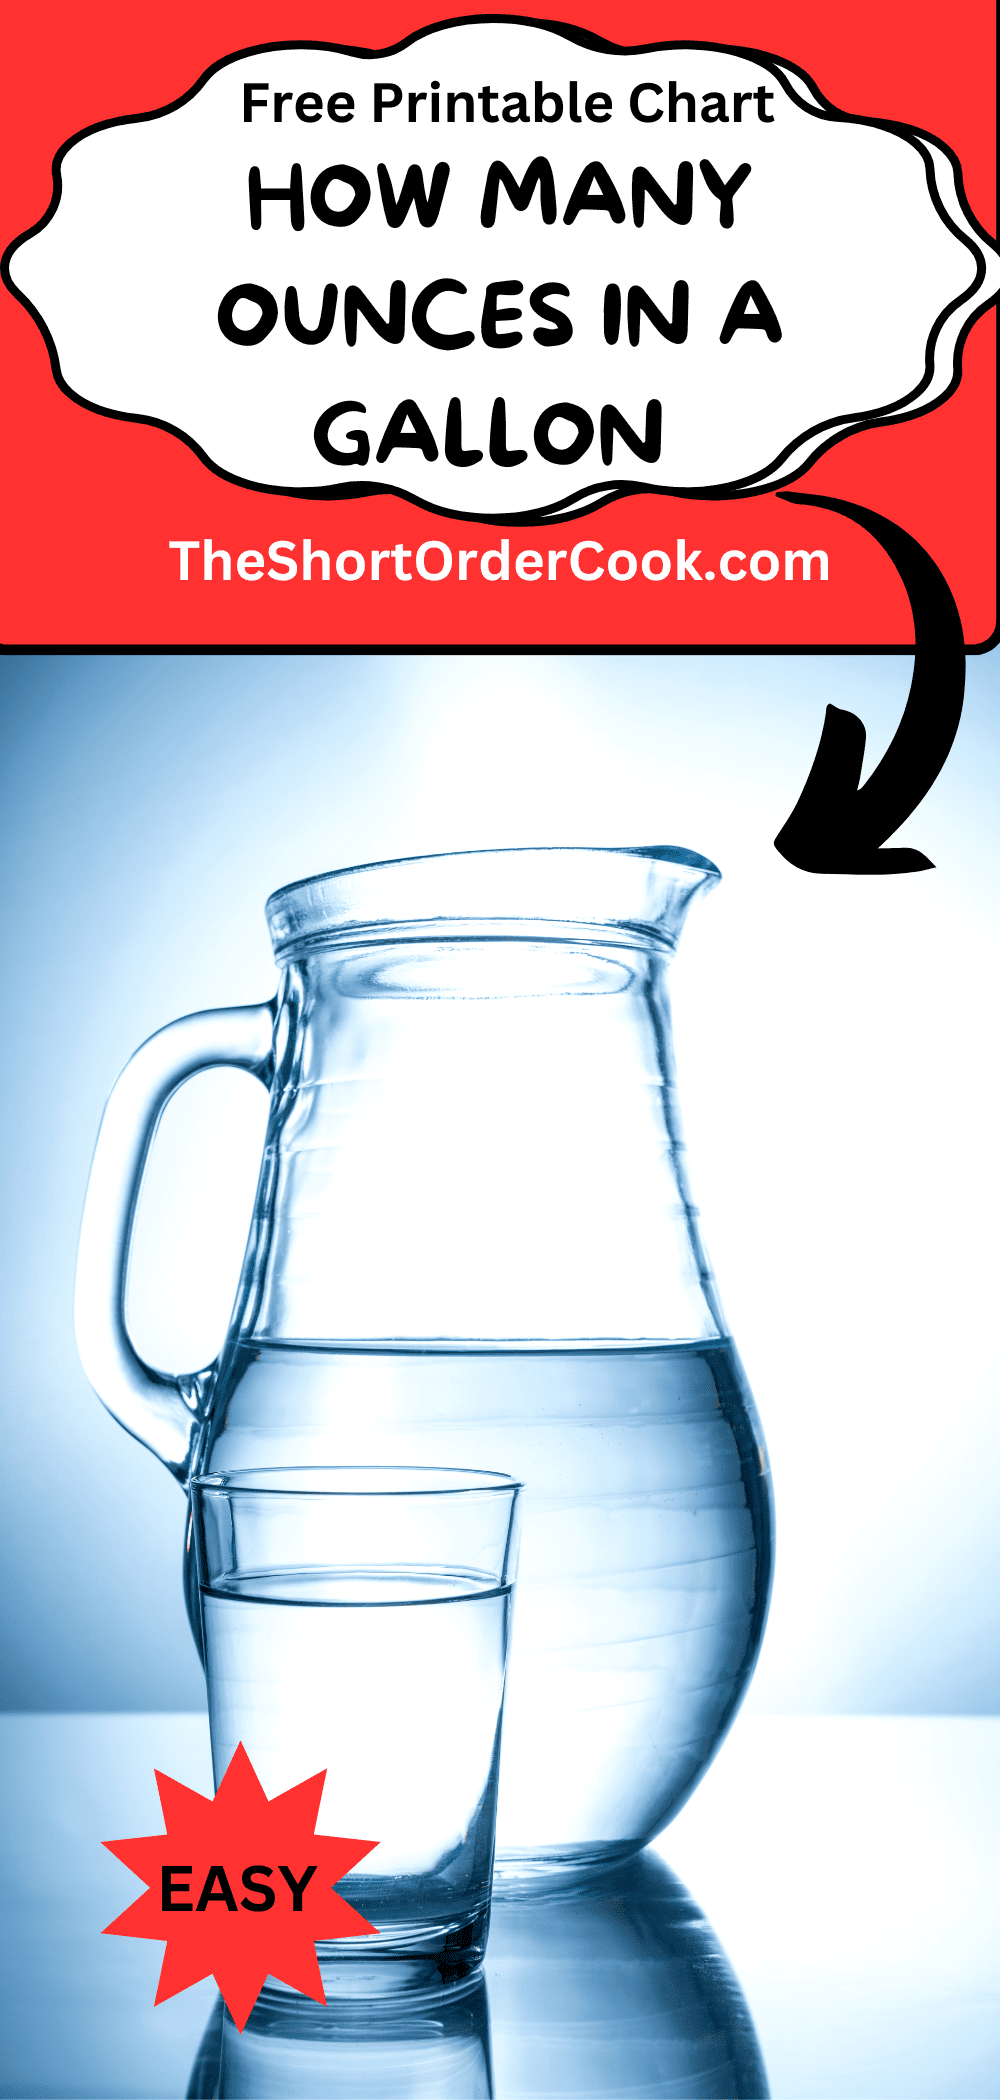 How Many Ounces in a Gallon showing a large pitcher and glass with water.